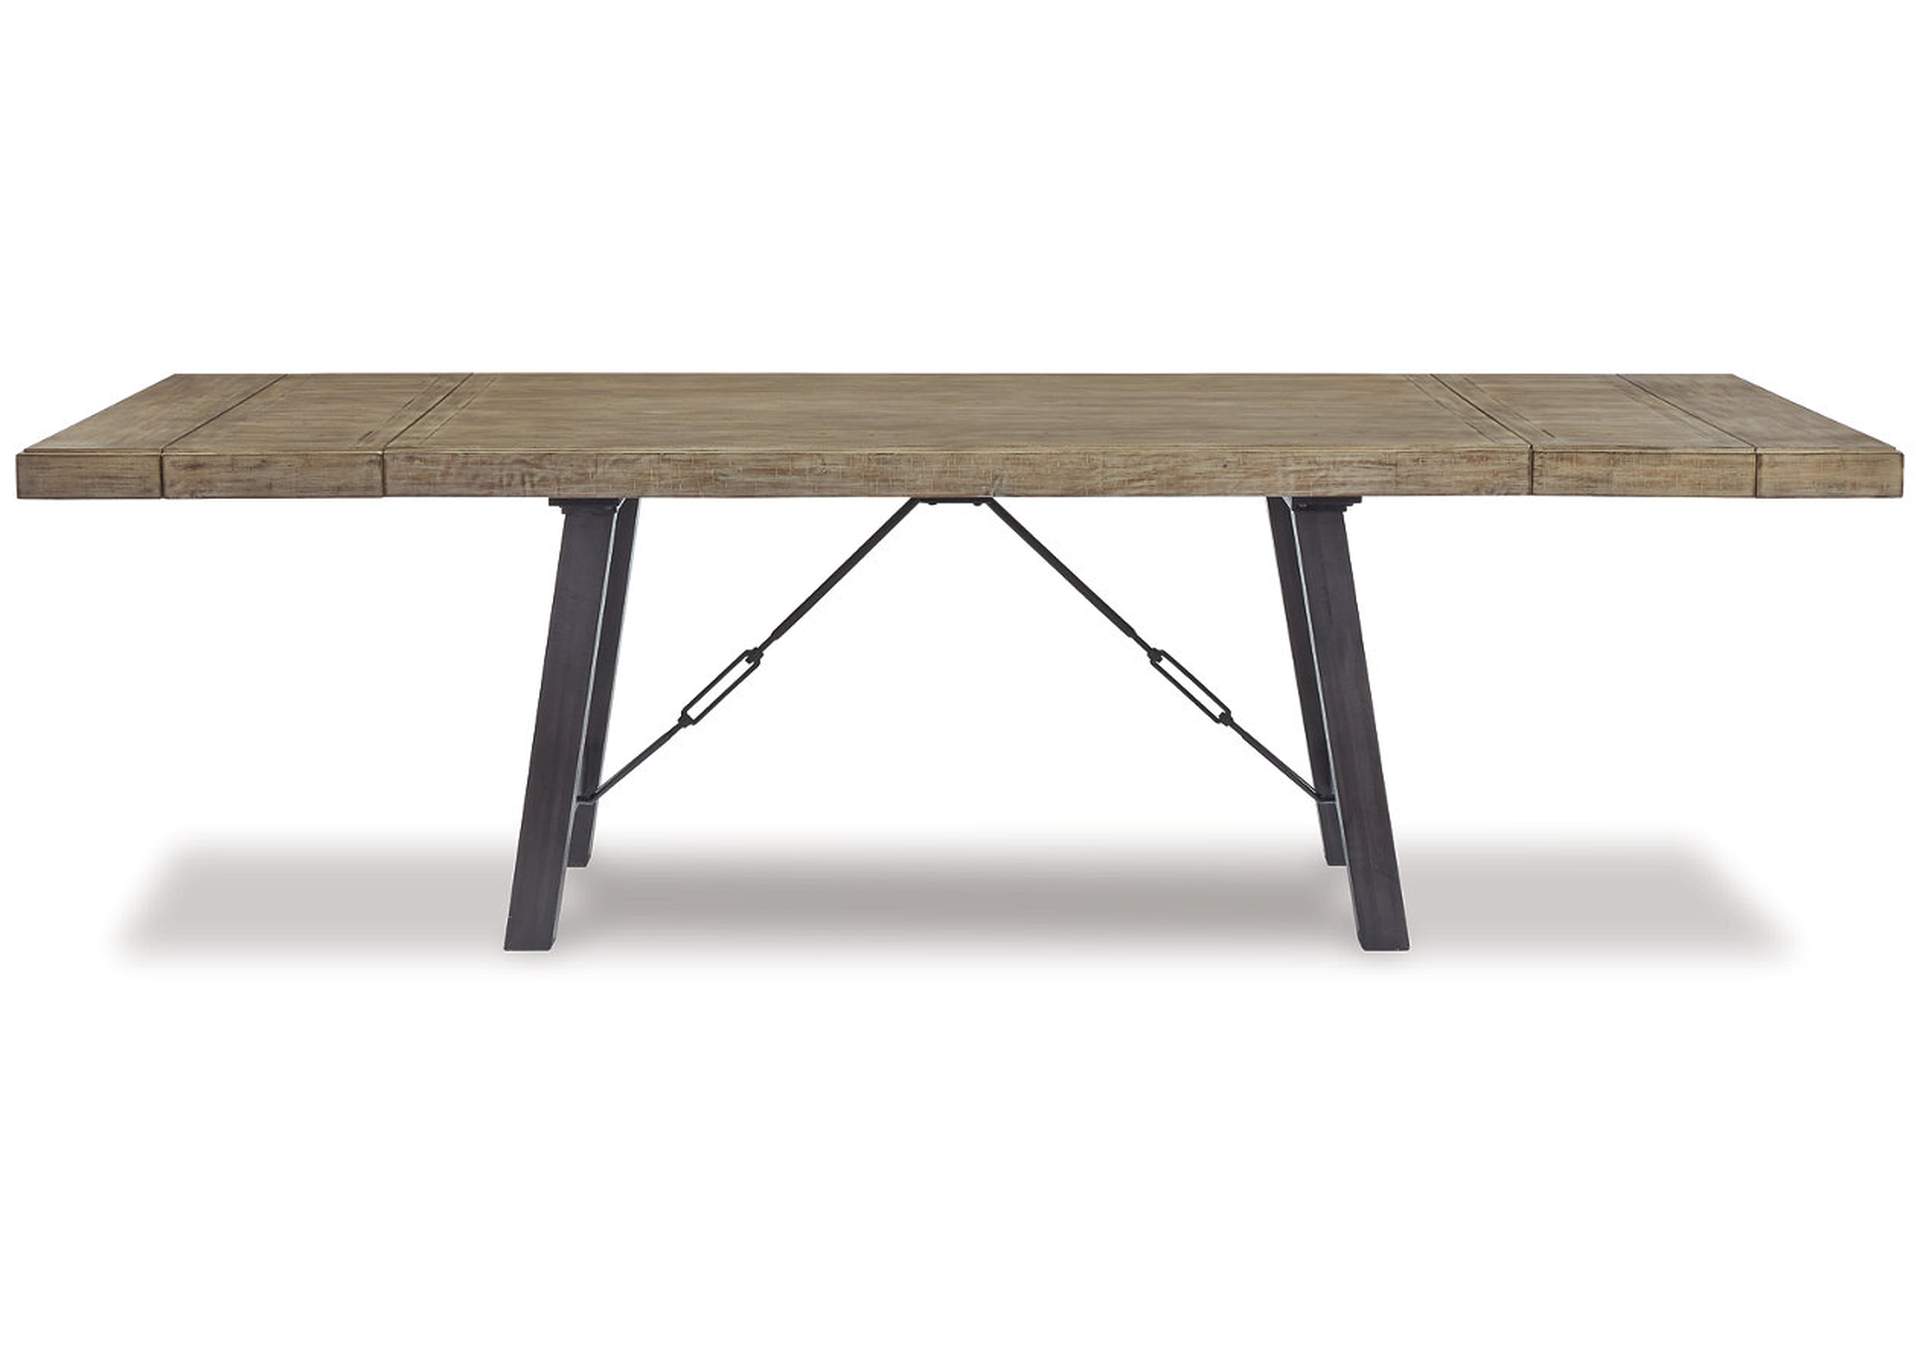 Baylow Dining Table,Ashley